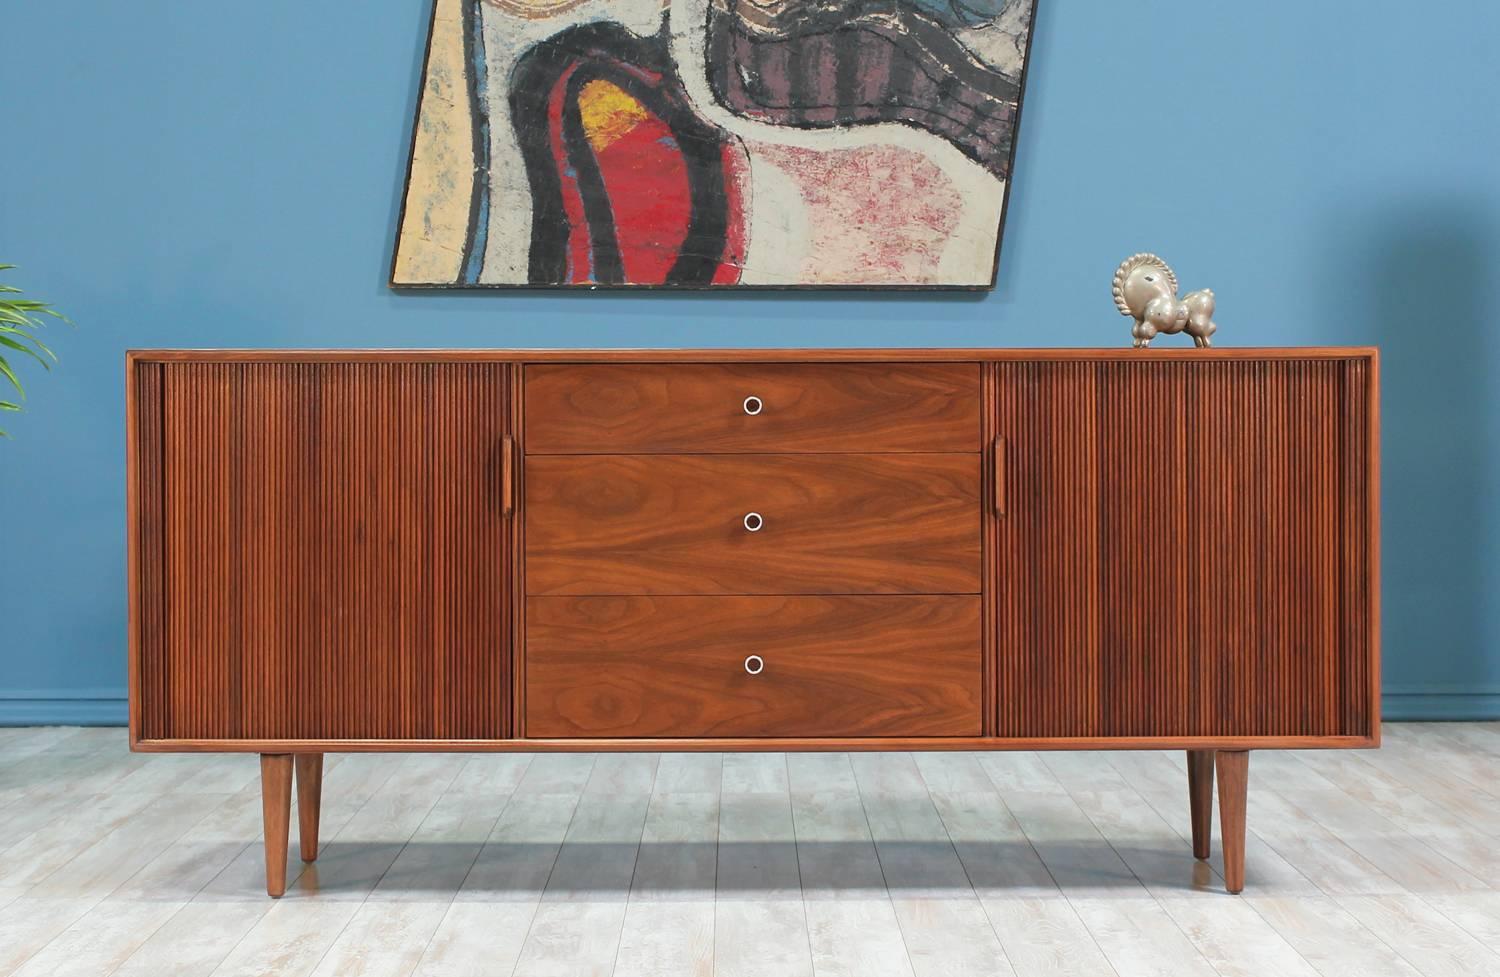 Tambour door credenza designed by Milo Baughman for Glenn of California in the United States circa 1960’s. This beautiful credenza features a walnut wood case, two tambour doors, one on each side, that open to reveal a shelved compartment. Three